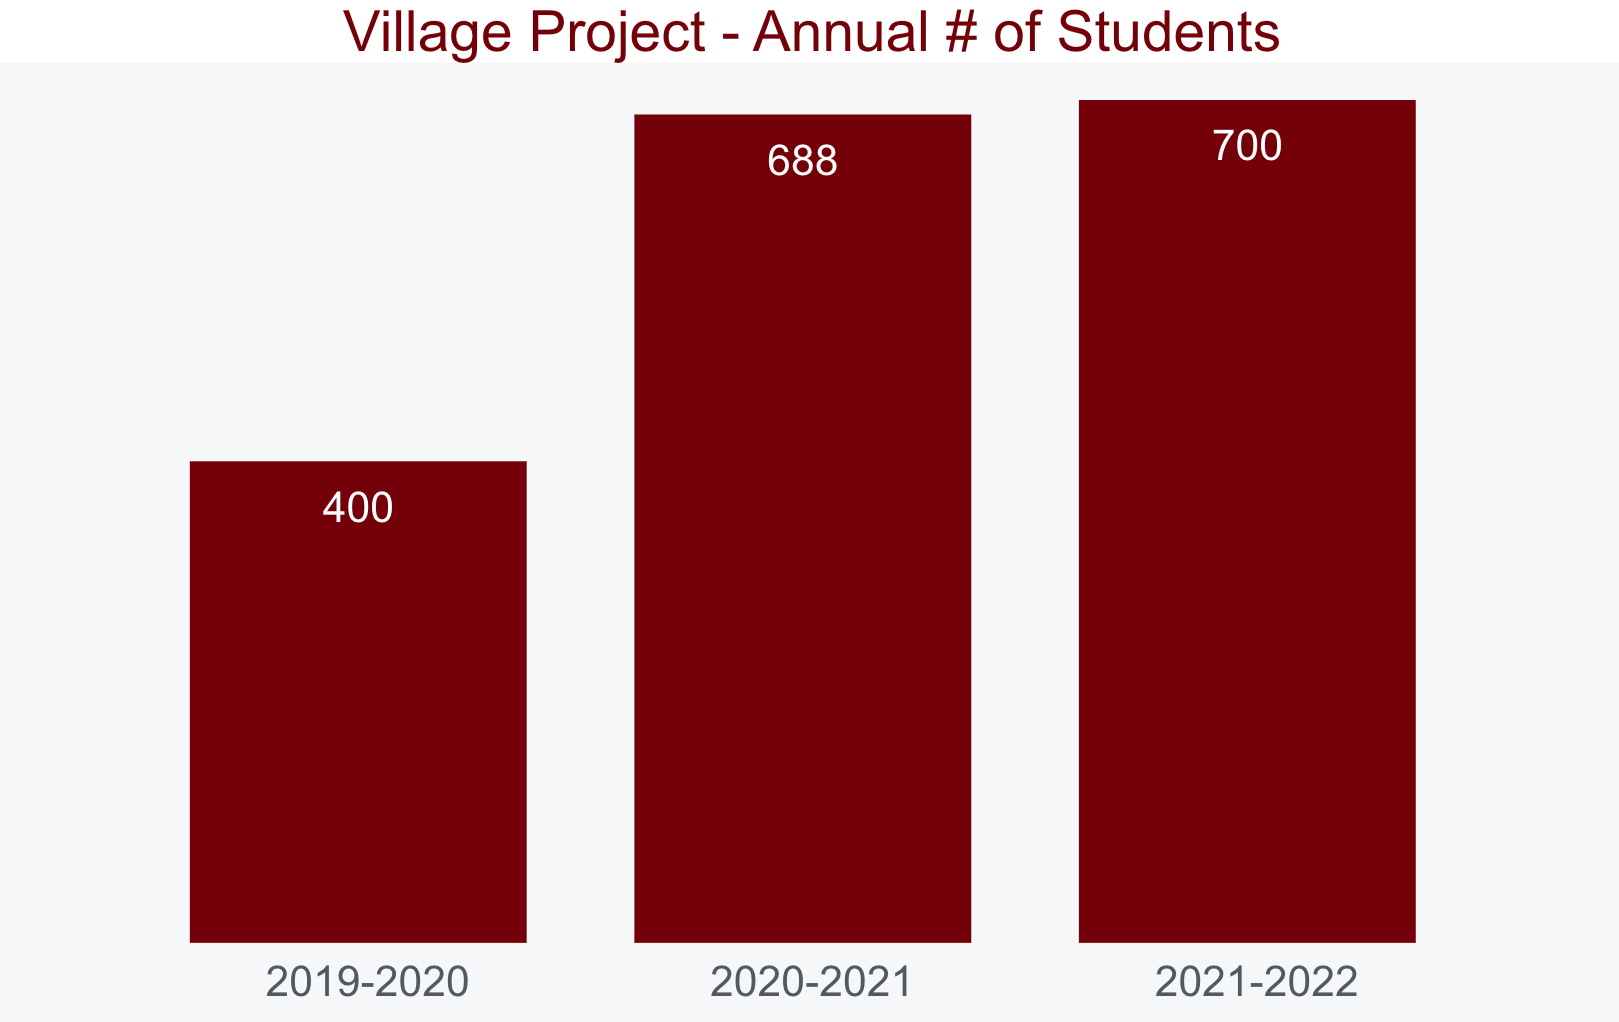 Bar chart showing the annual number of students in Elon's Village Project